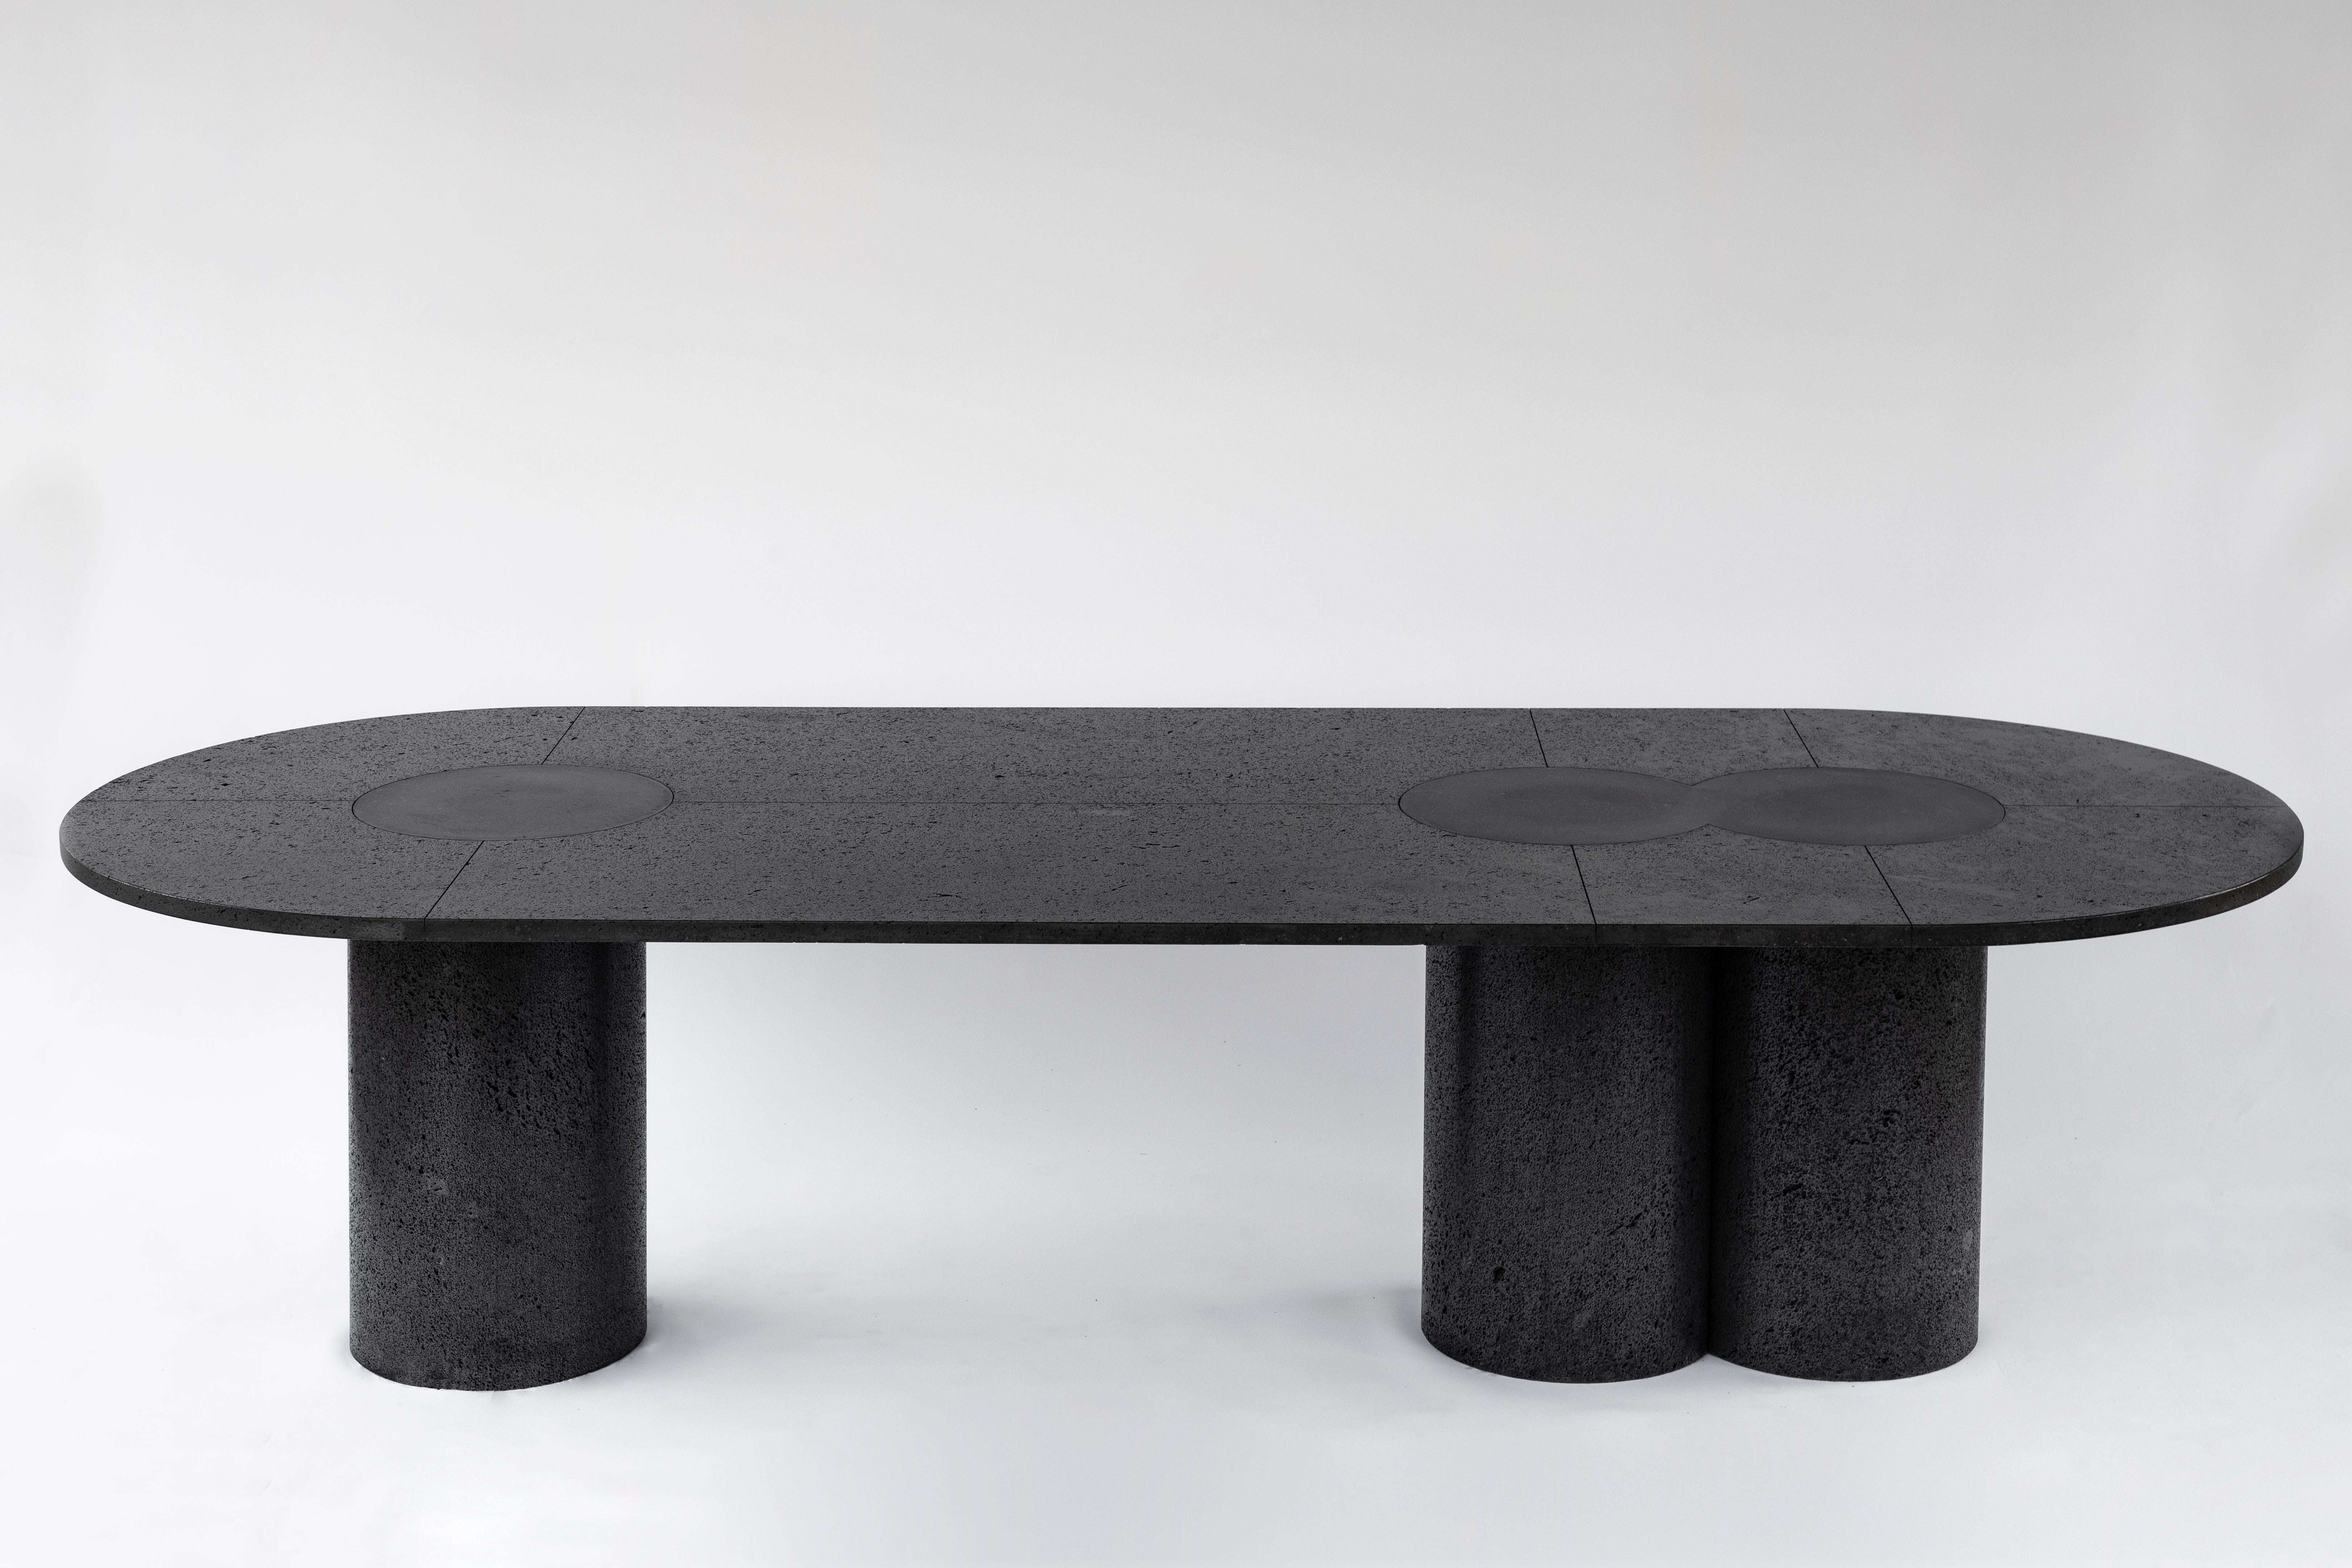 Our reverence towards the sumptuosness of volcanic stone has lead us to honor this noble material with a table / sculpture whose rich, porous top sits on top of three cylindrical monoliths born from the whims of Mexico's volcanic terrain.
Etched